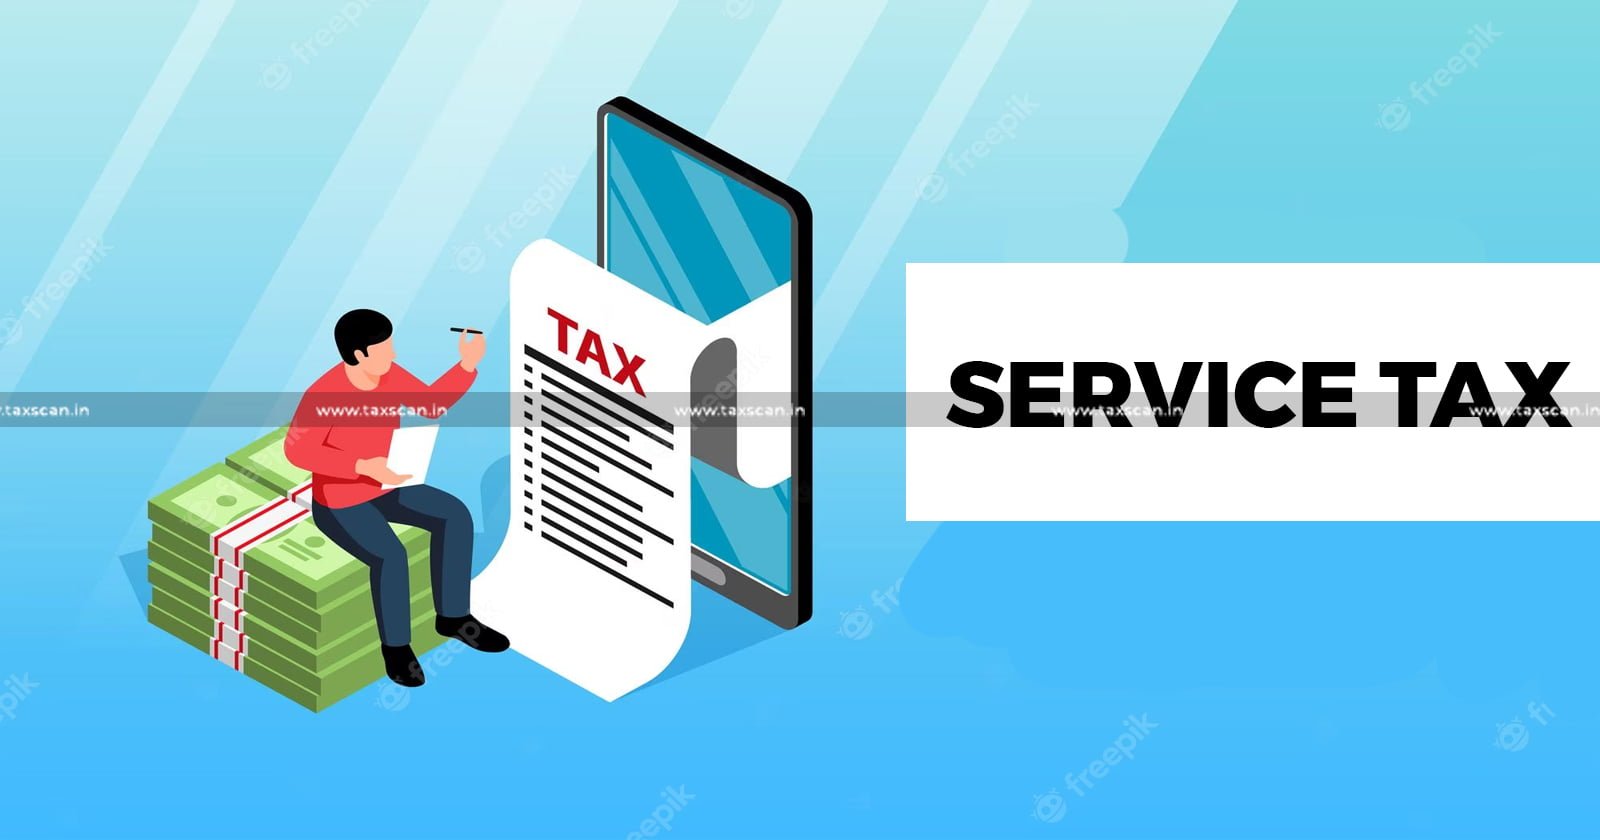 service tax- Health & Fitness Services -Beauty Parlour Services- revised rate 12.24%- CESTAT- excise- customs-taxscan